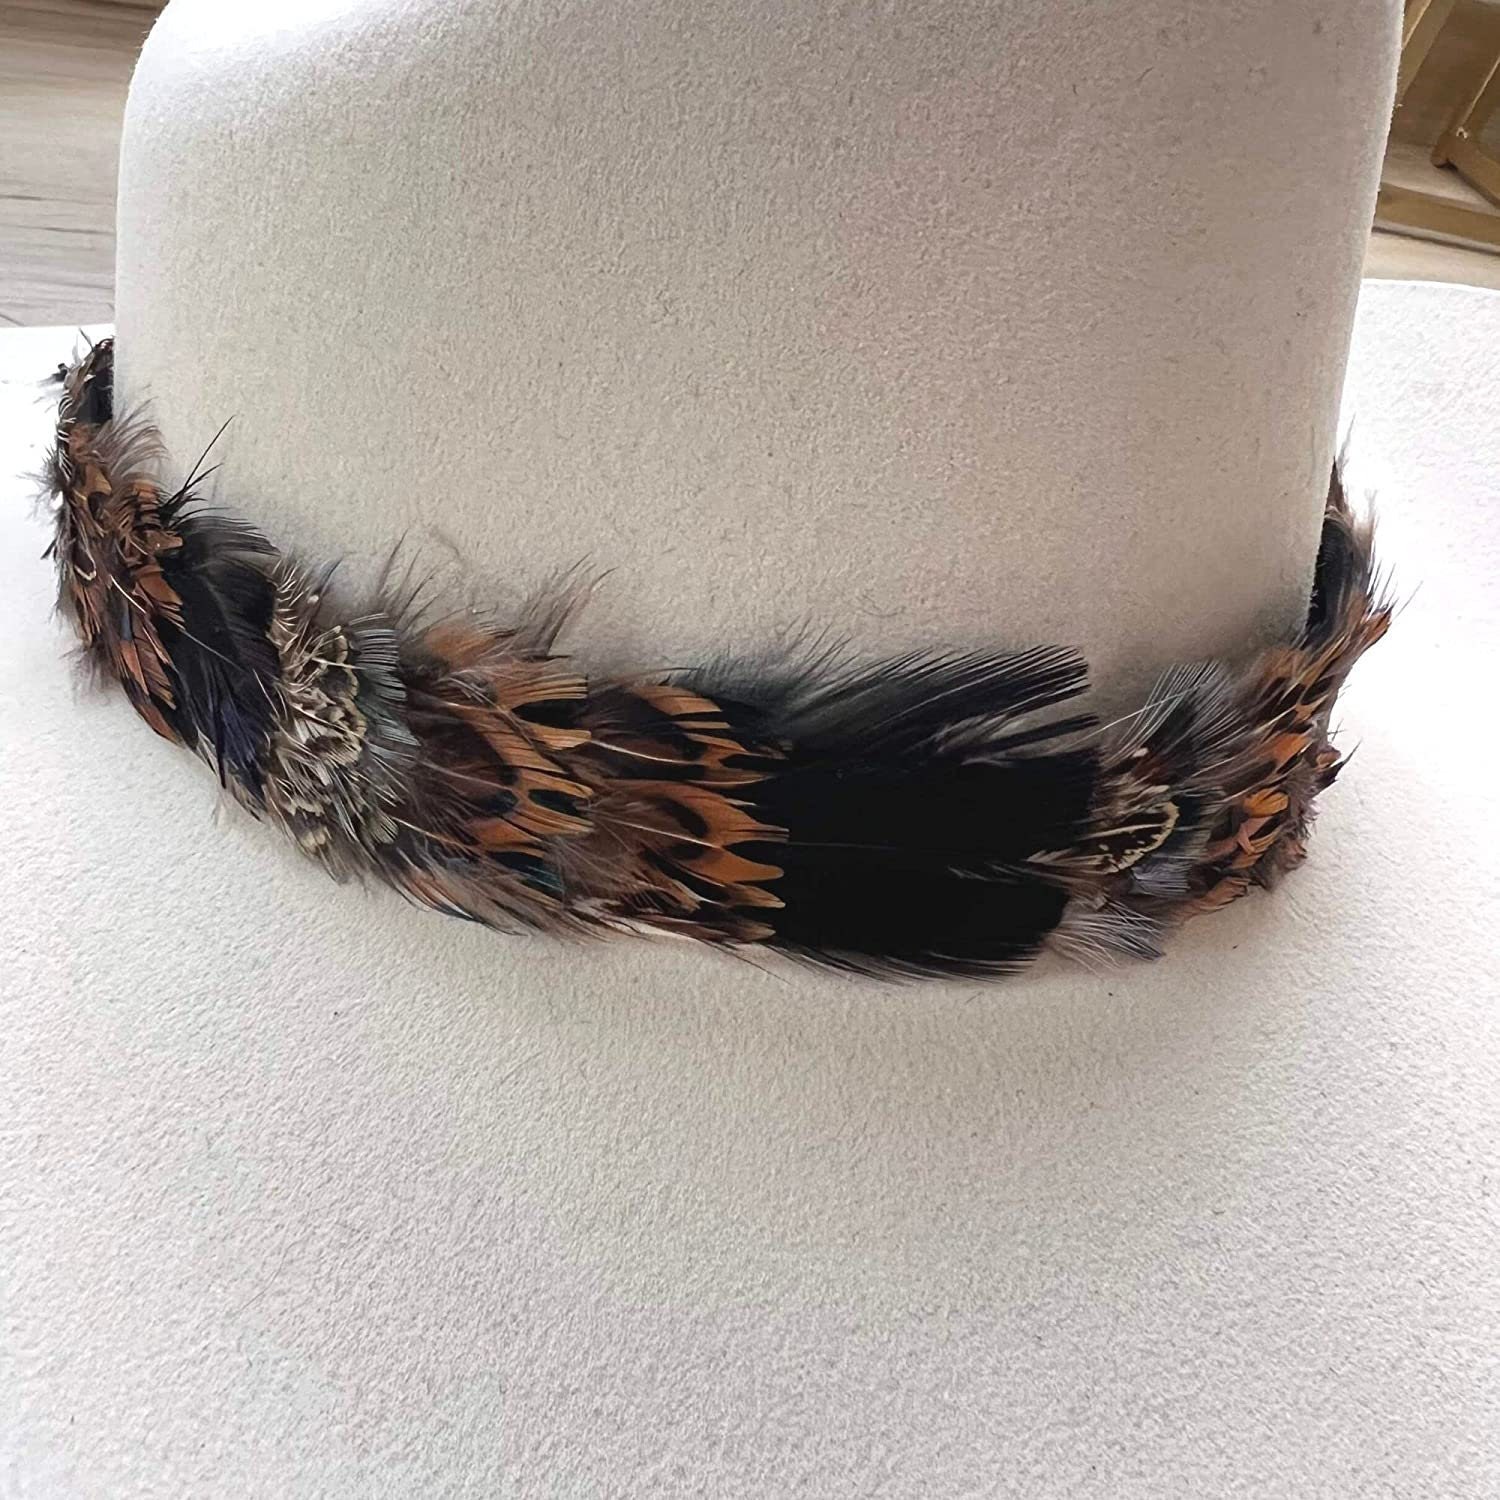 Feather Hat Accent - Ringtail